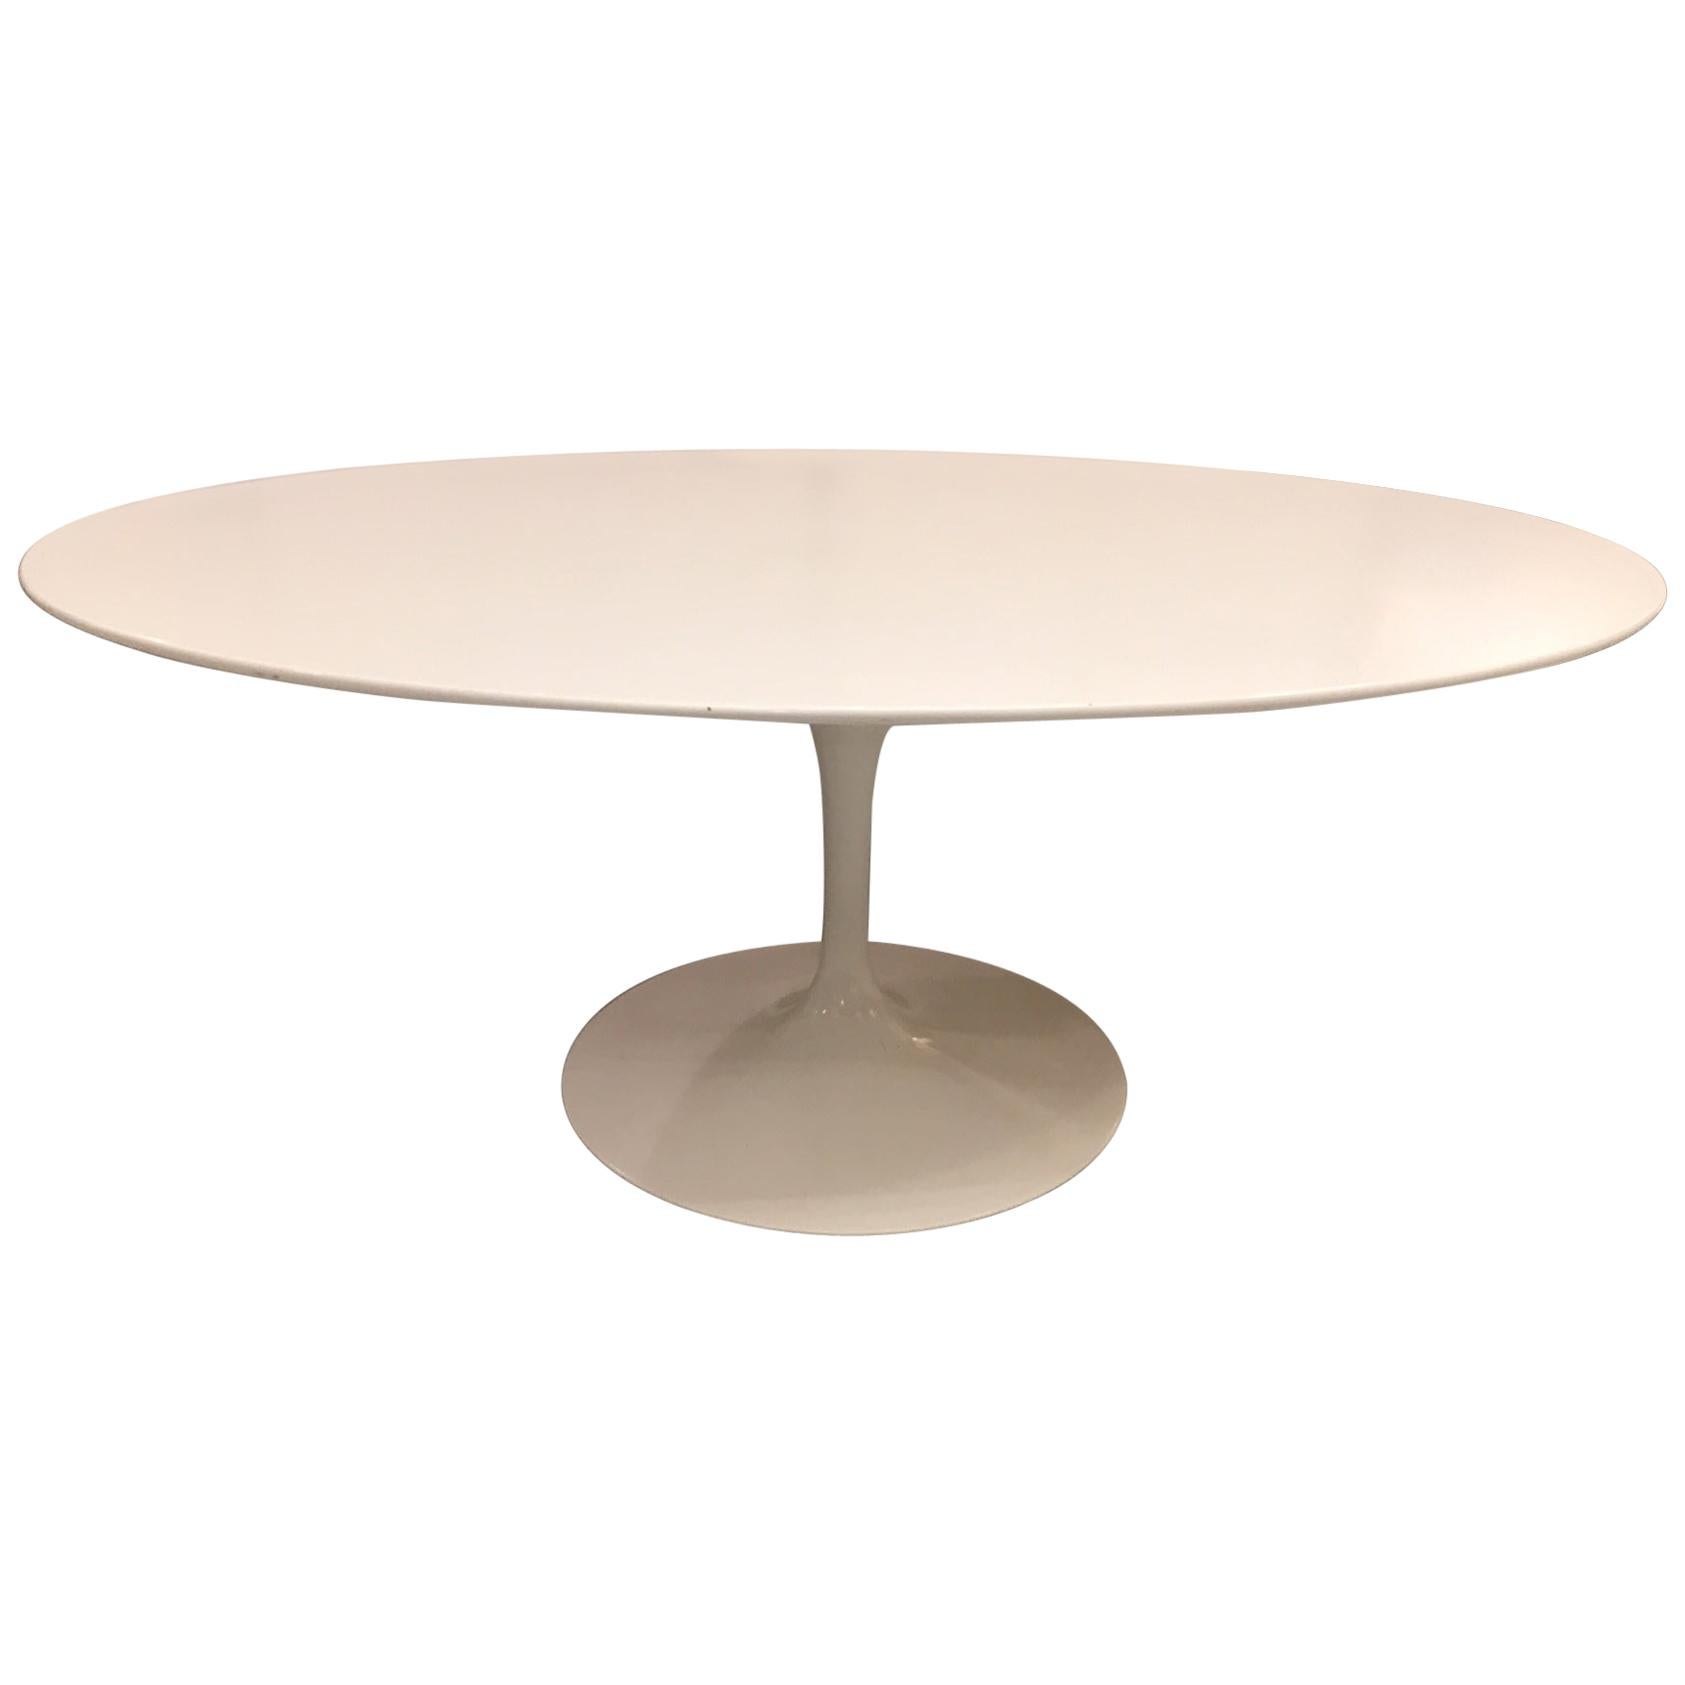 Vintage White Laminate Tulip Oval Coffee Table by Eero Saarinen for Knoll Int.